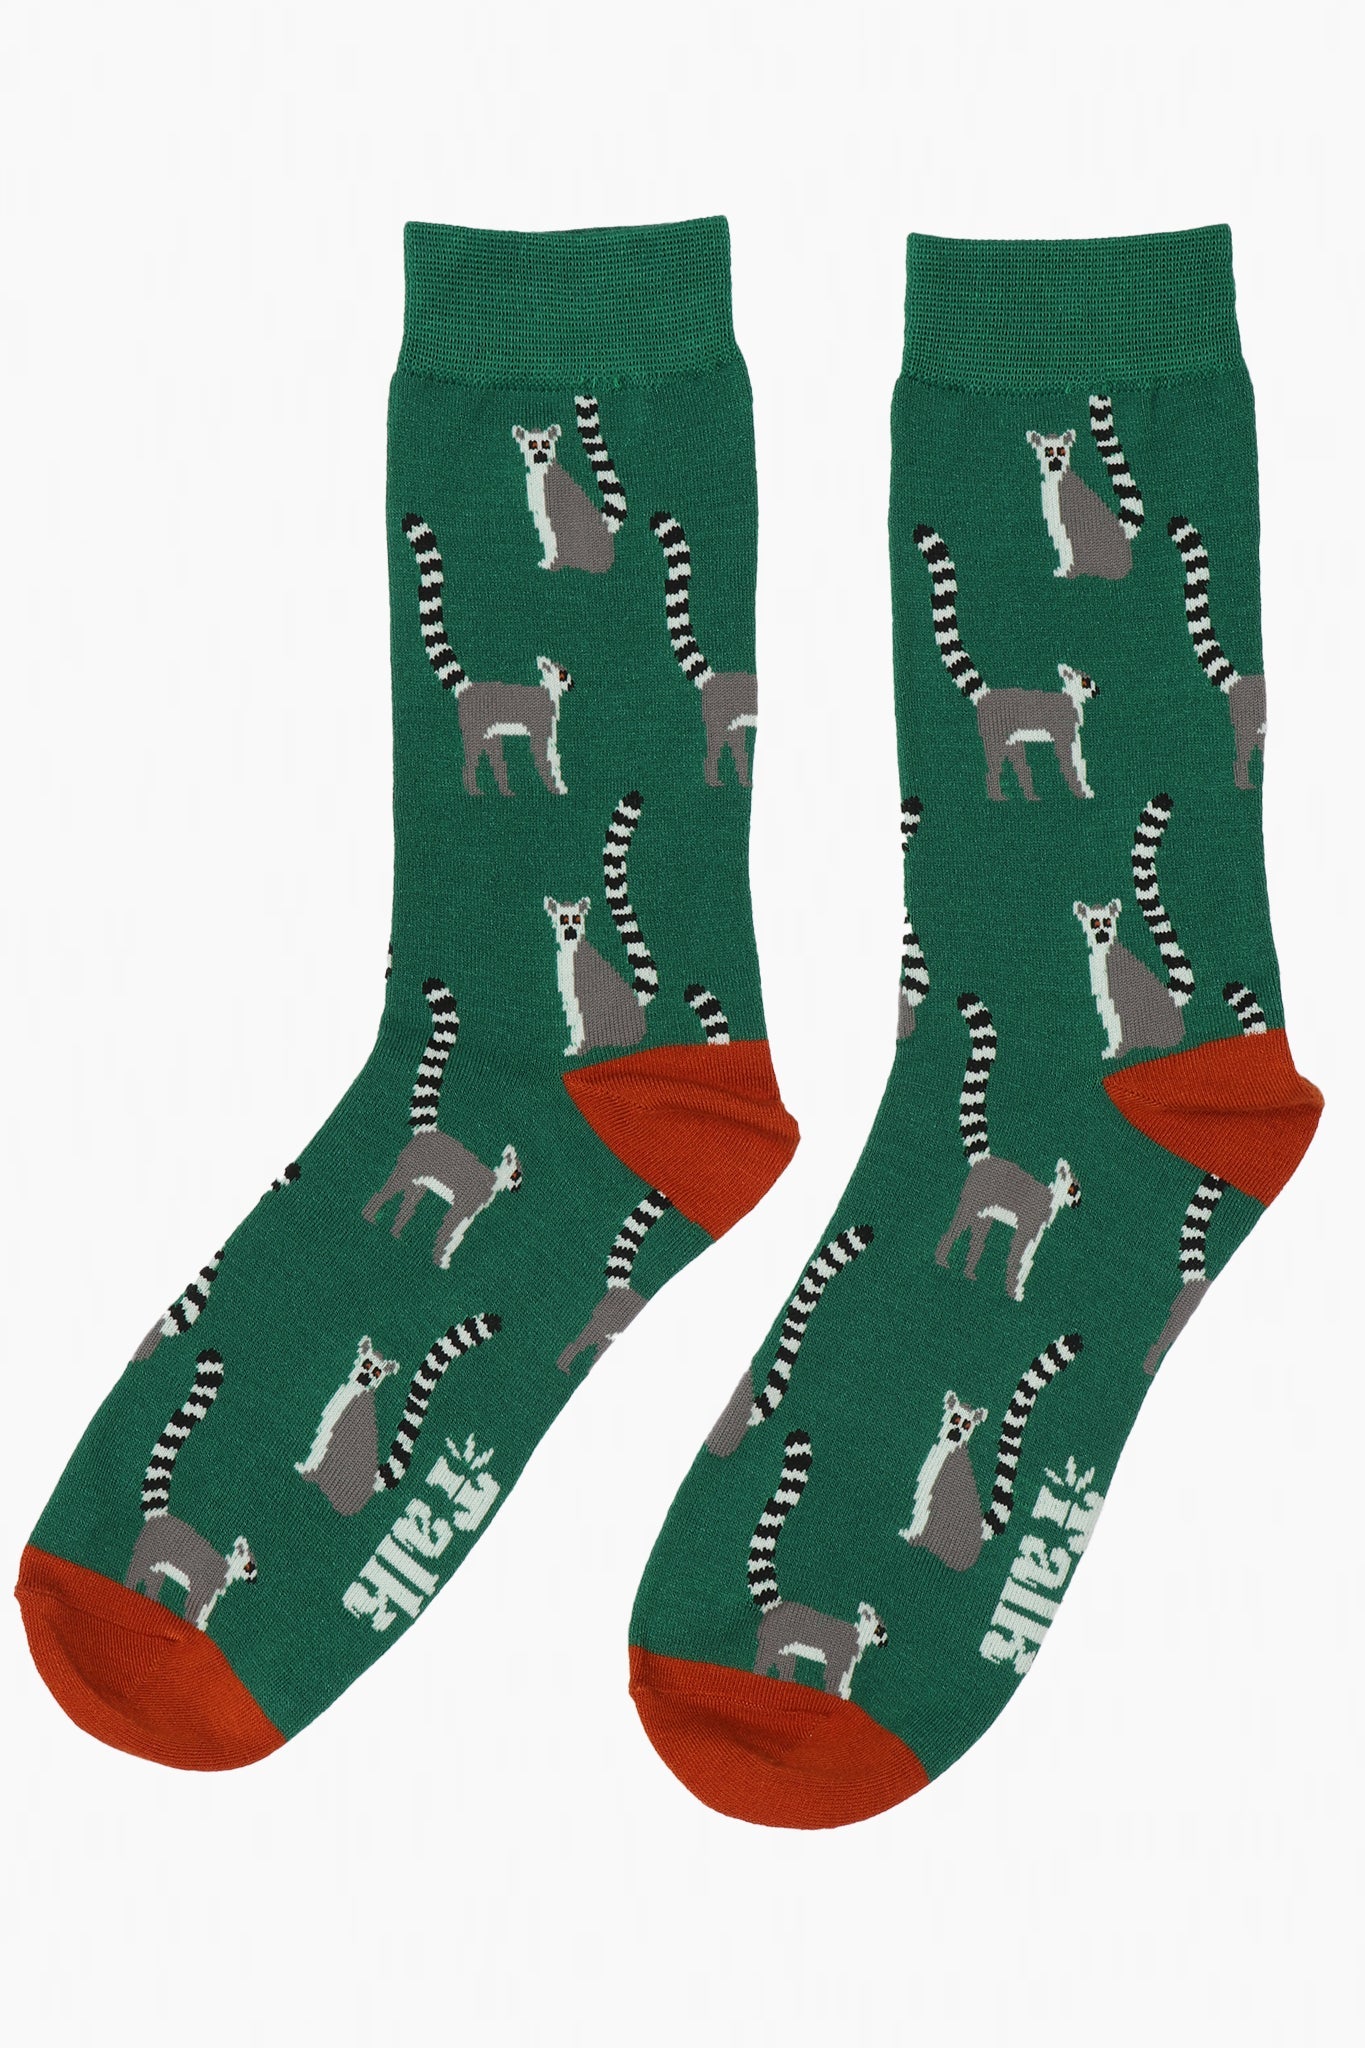 green and orange bamboo novelty socks with an all over pattern of lemurs